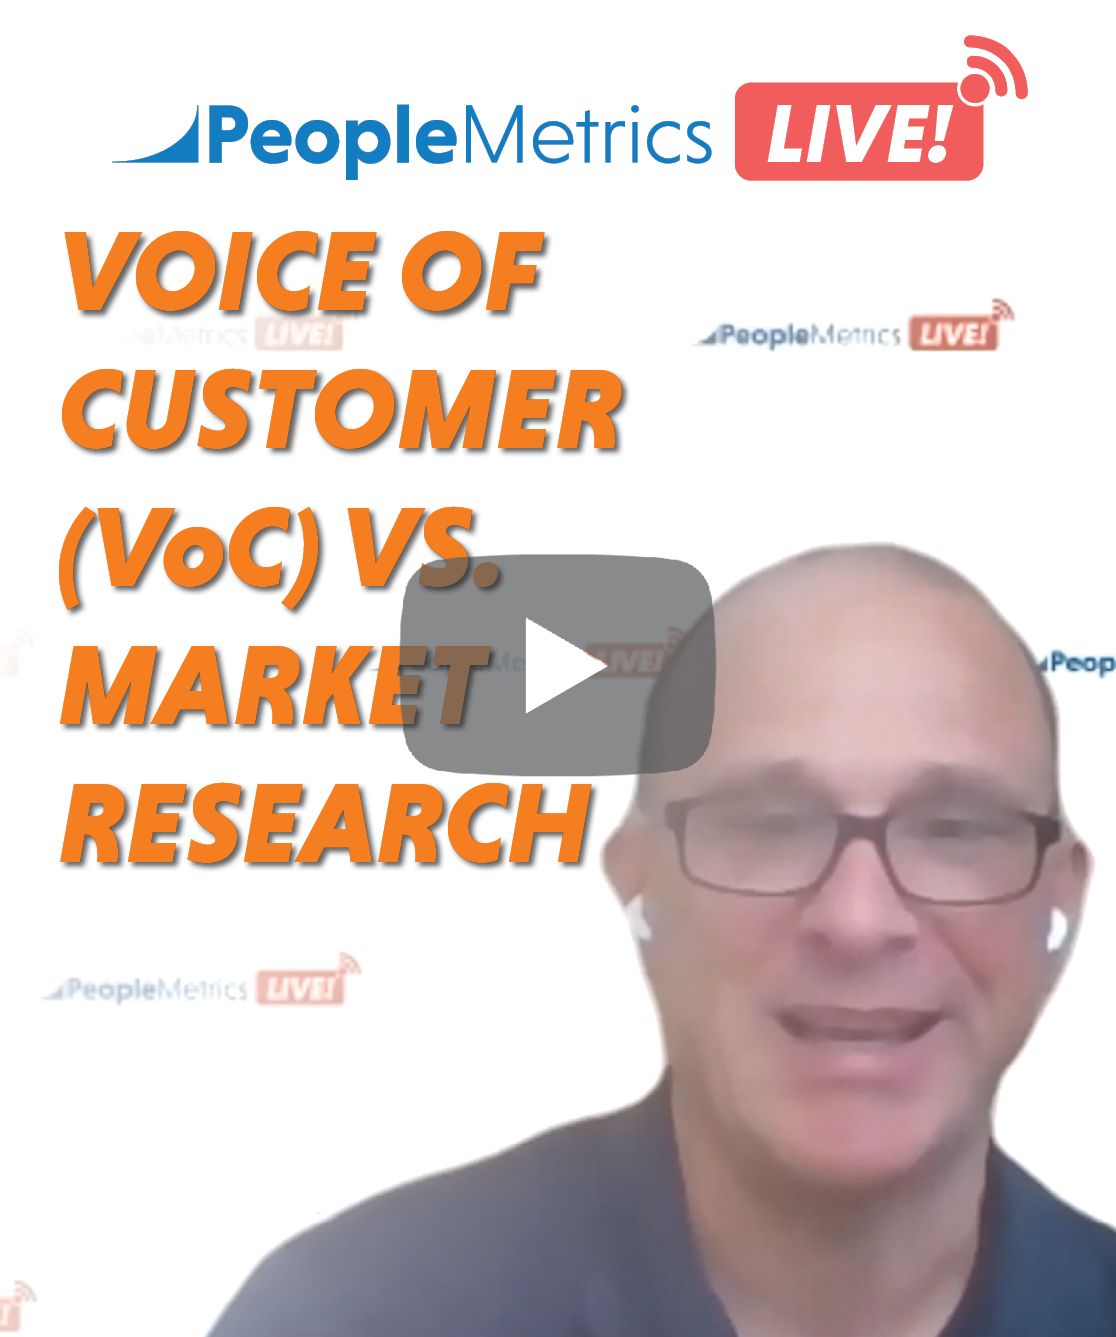 WATCH NOW: Is Voice of Customer (VoC) The Same As Market Research? | PeopleMetrics LIVE!